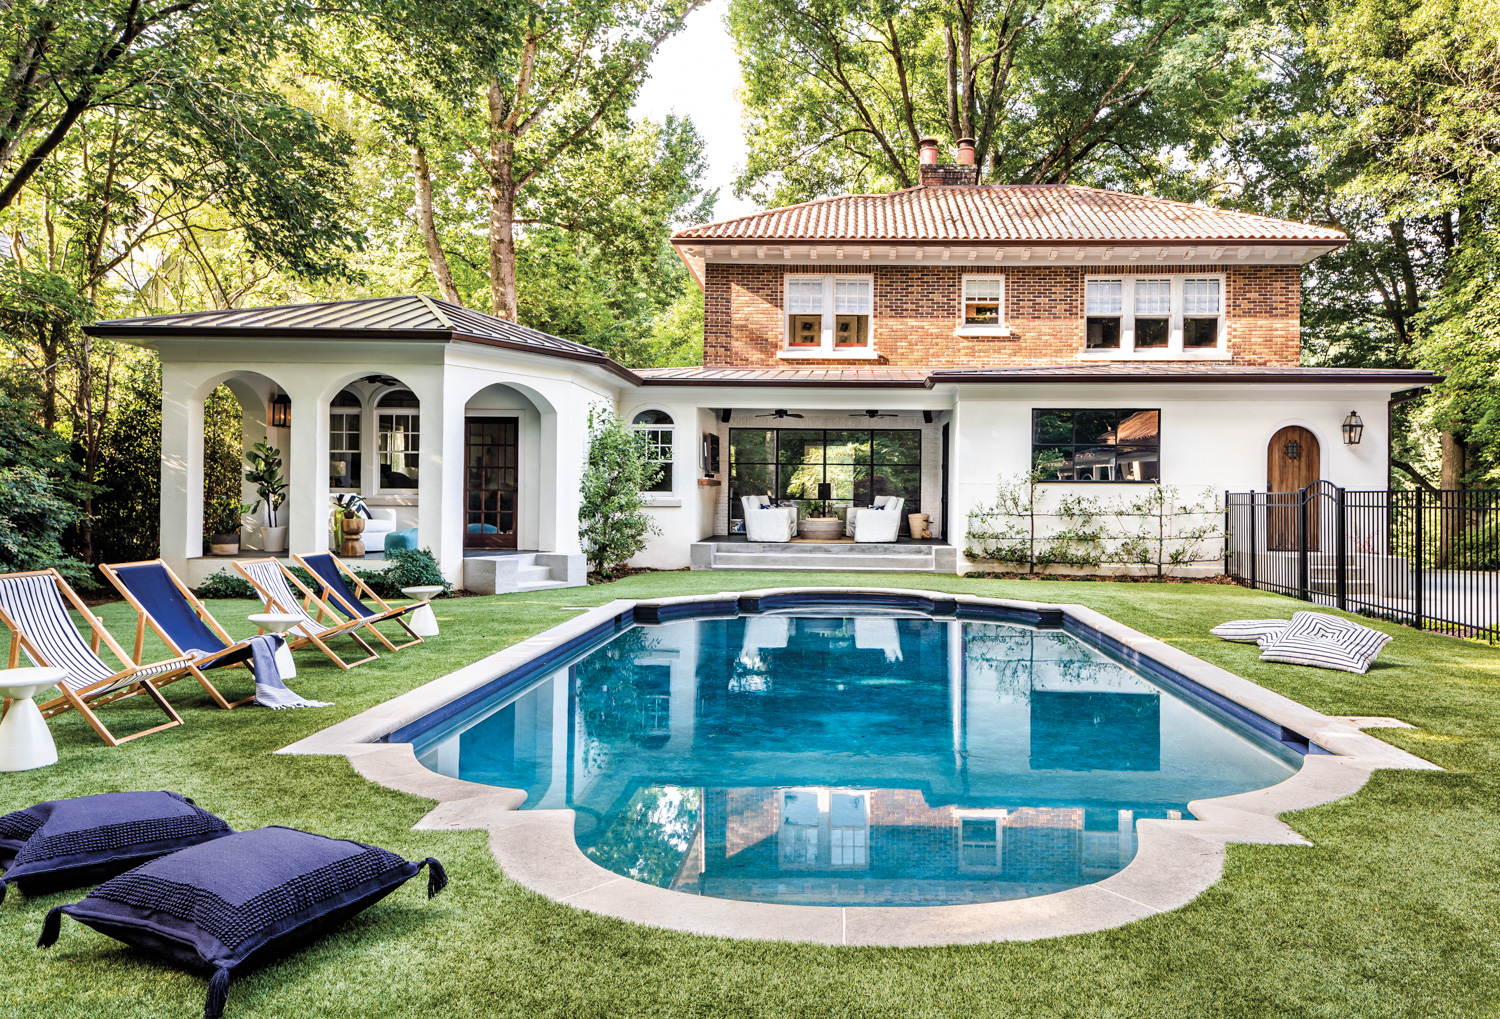 Backyard with large swimming pool, green grass and lounge furniture